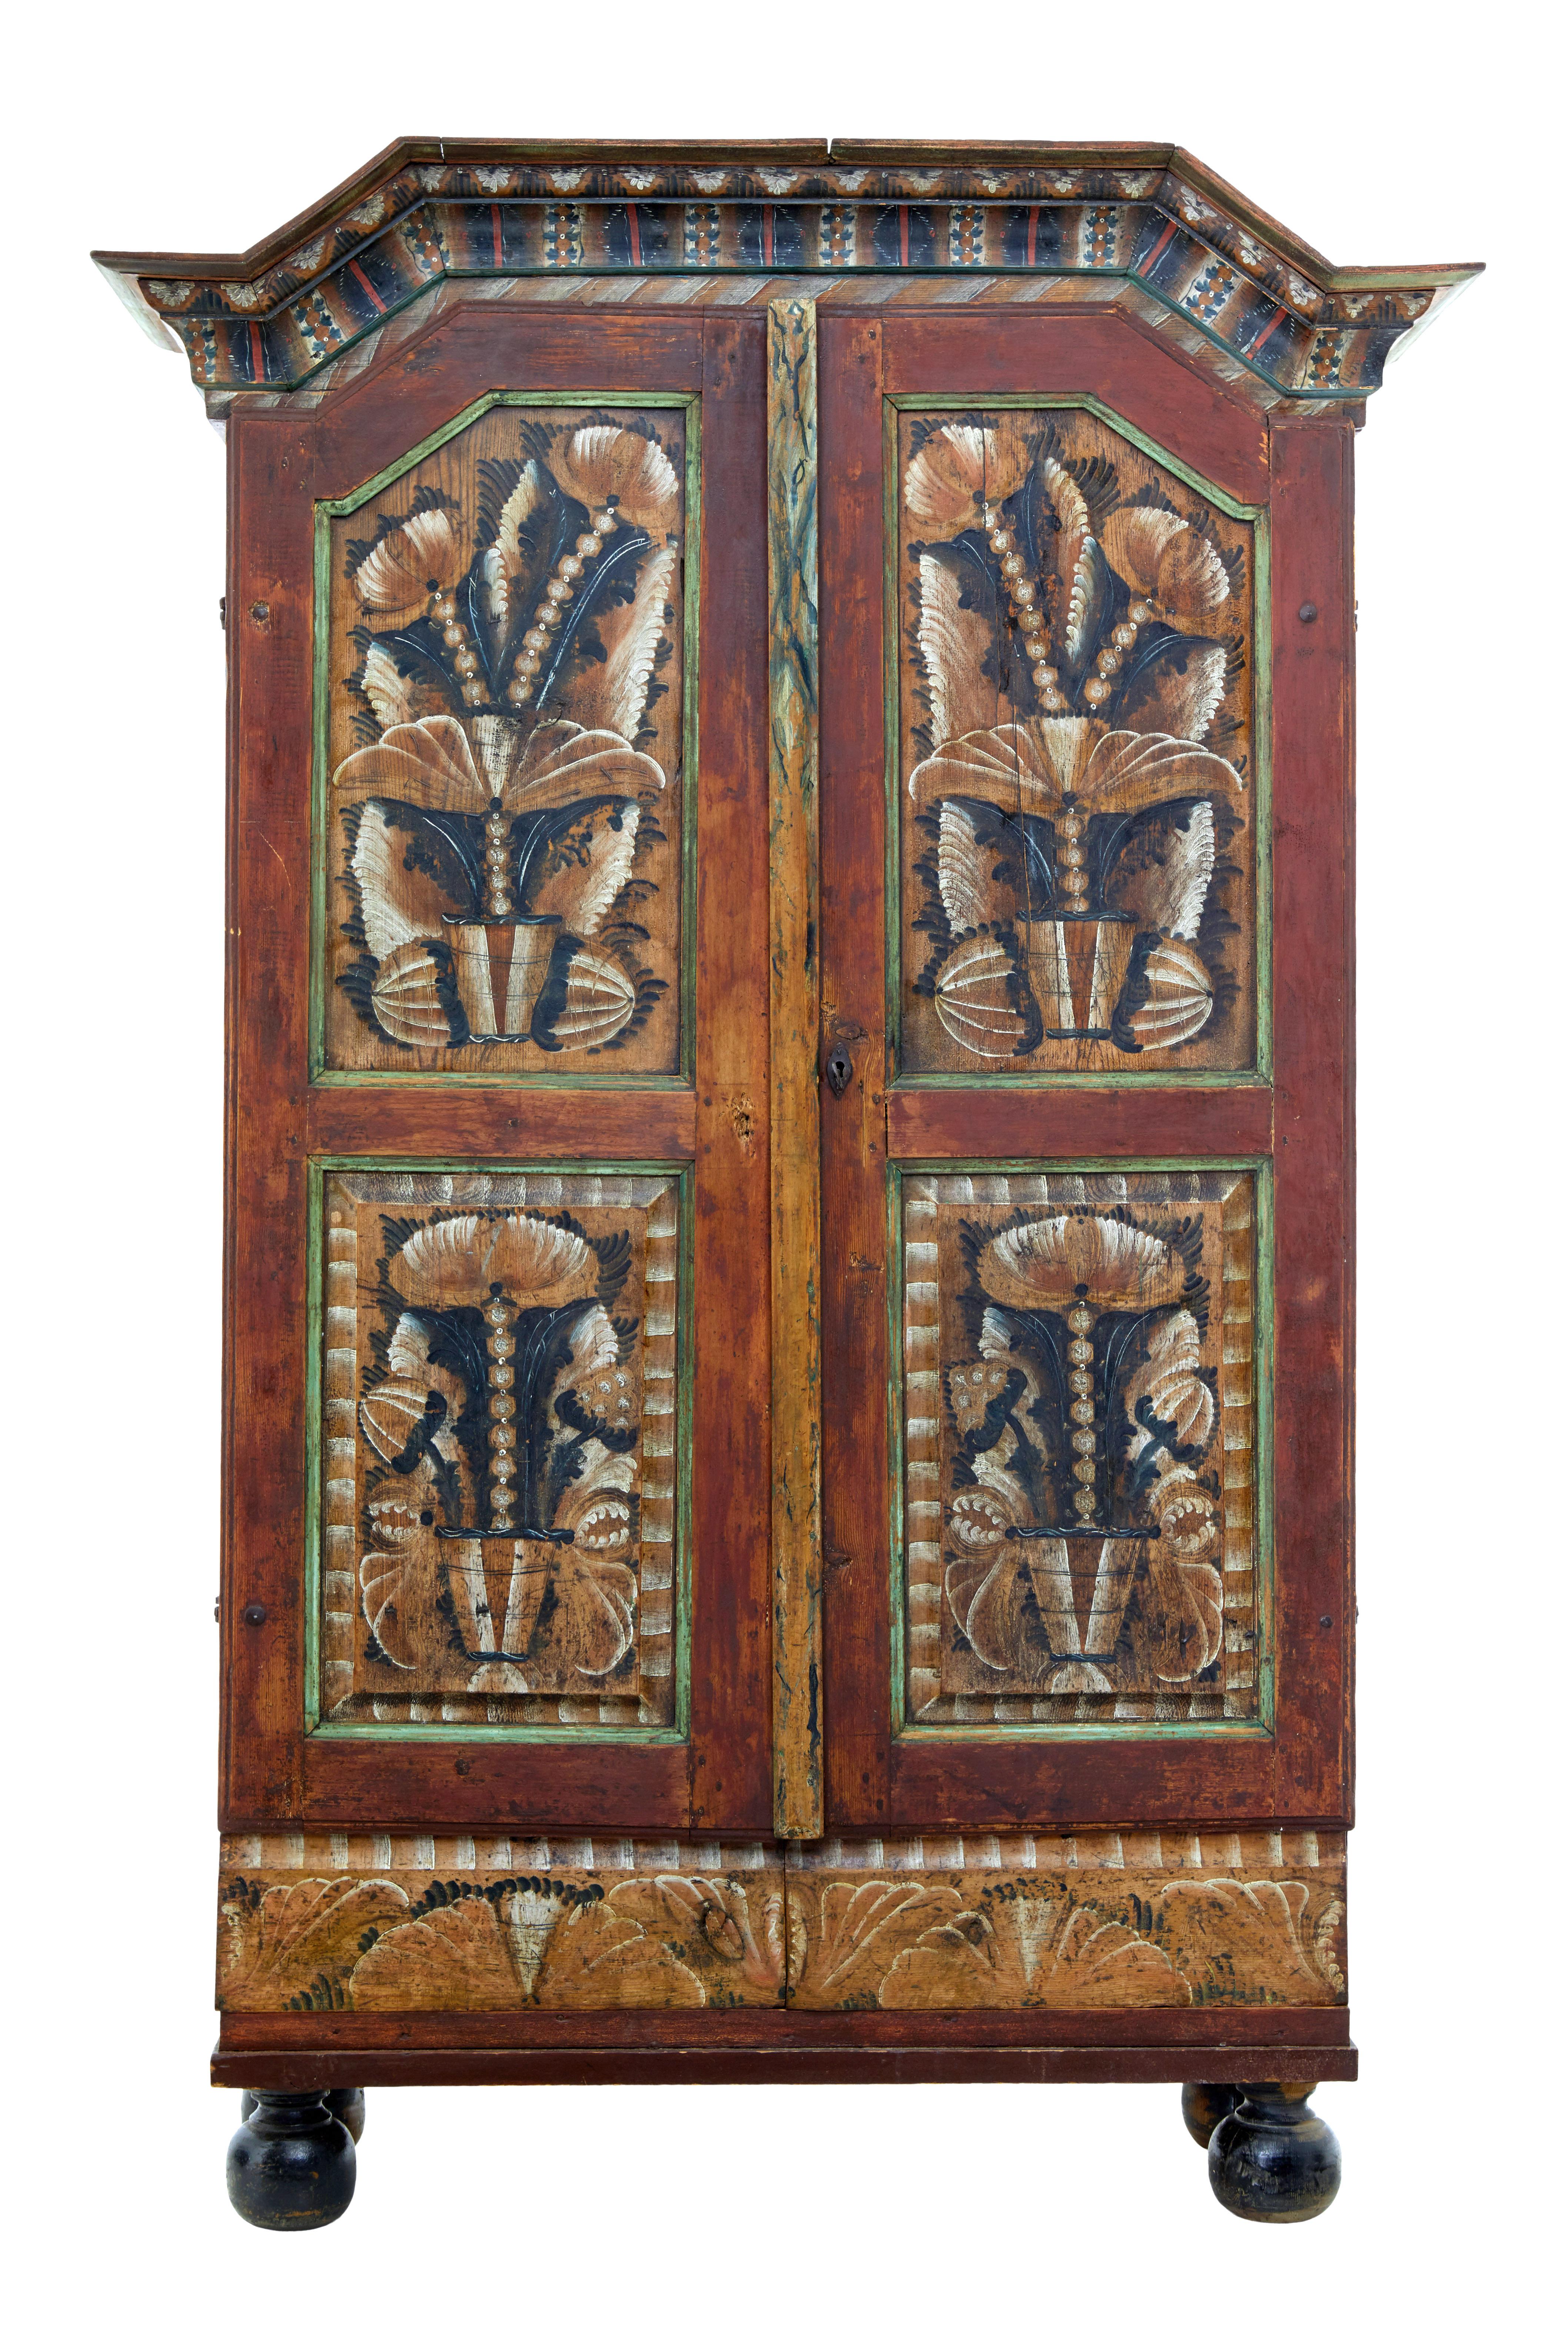 Fine quality piece of traditional Swedish painted folk art furniture, circa 1840.

Heavily hand painted front, from the cornice to the bottom drawers. Shaped cornice below which the double doors open to reveal a fixed shelf interior of 4 shelves.